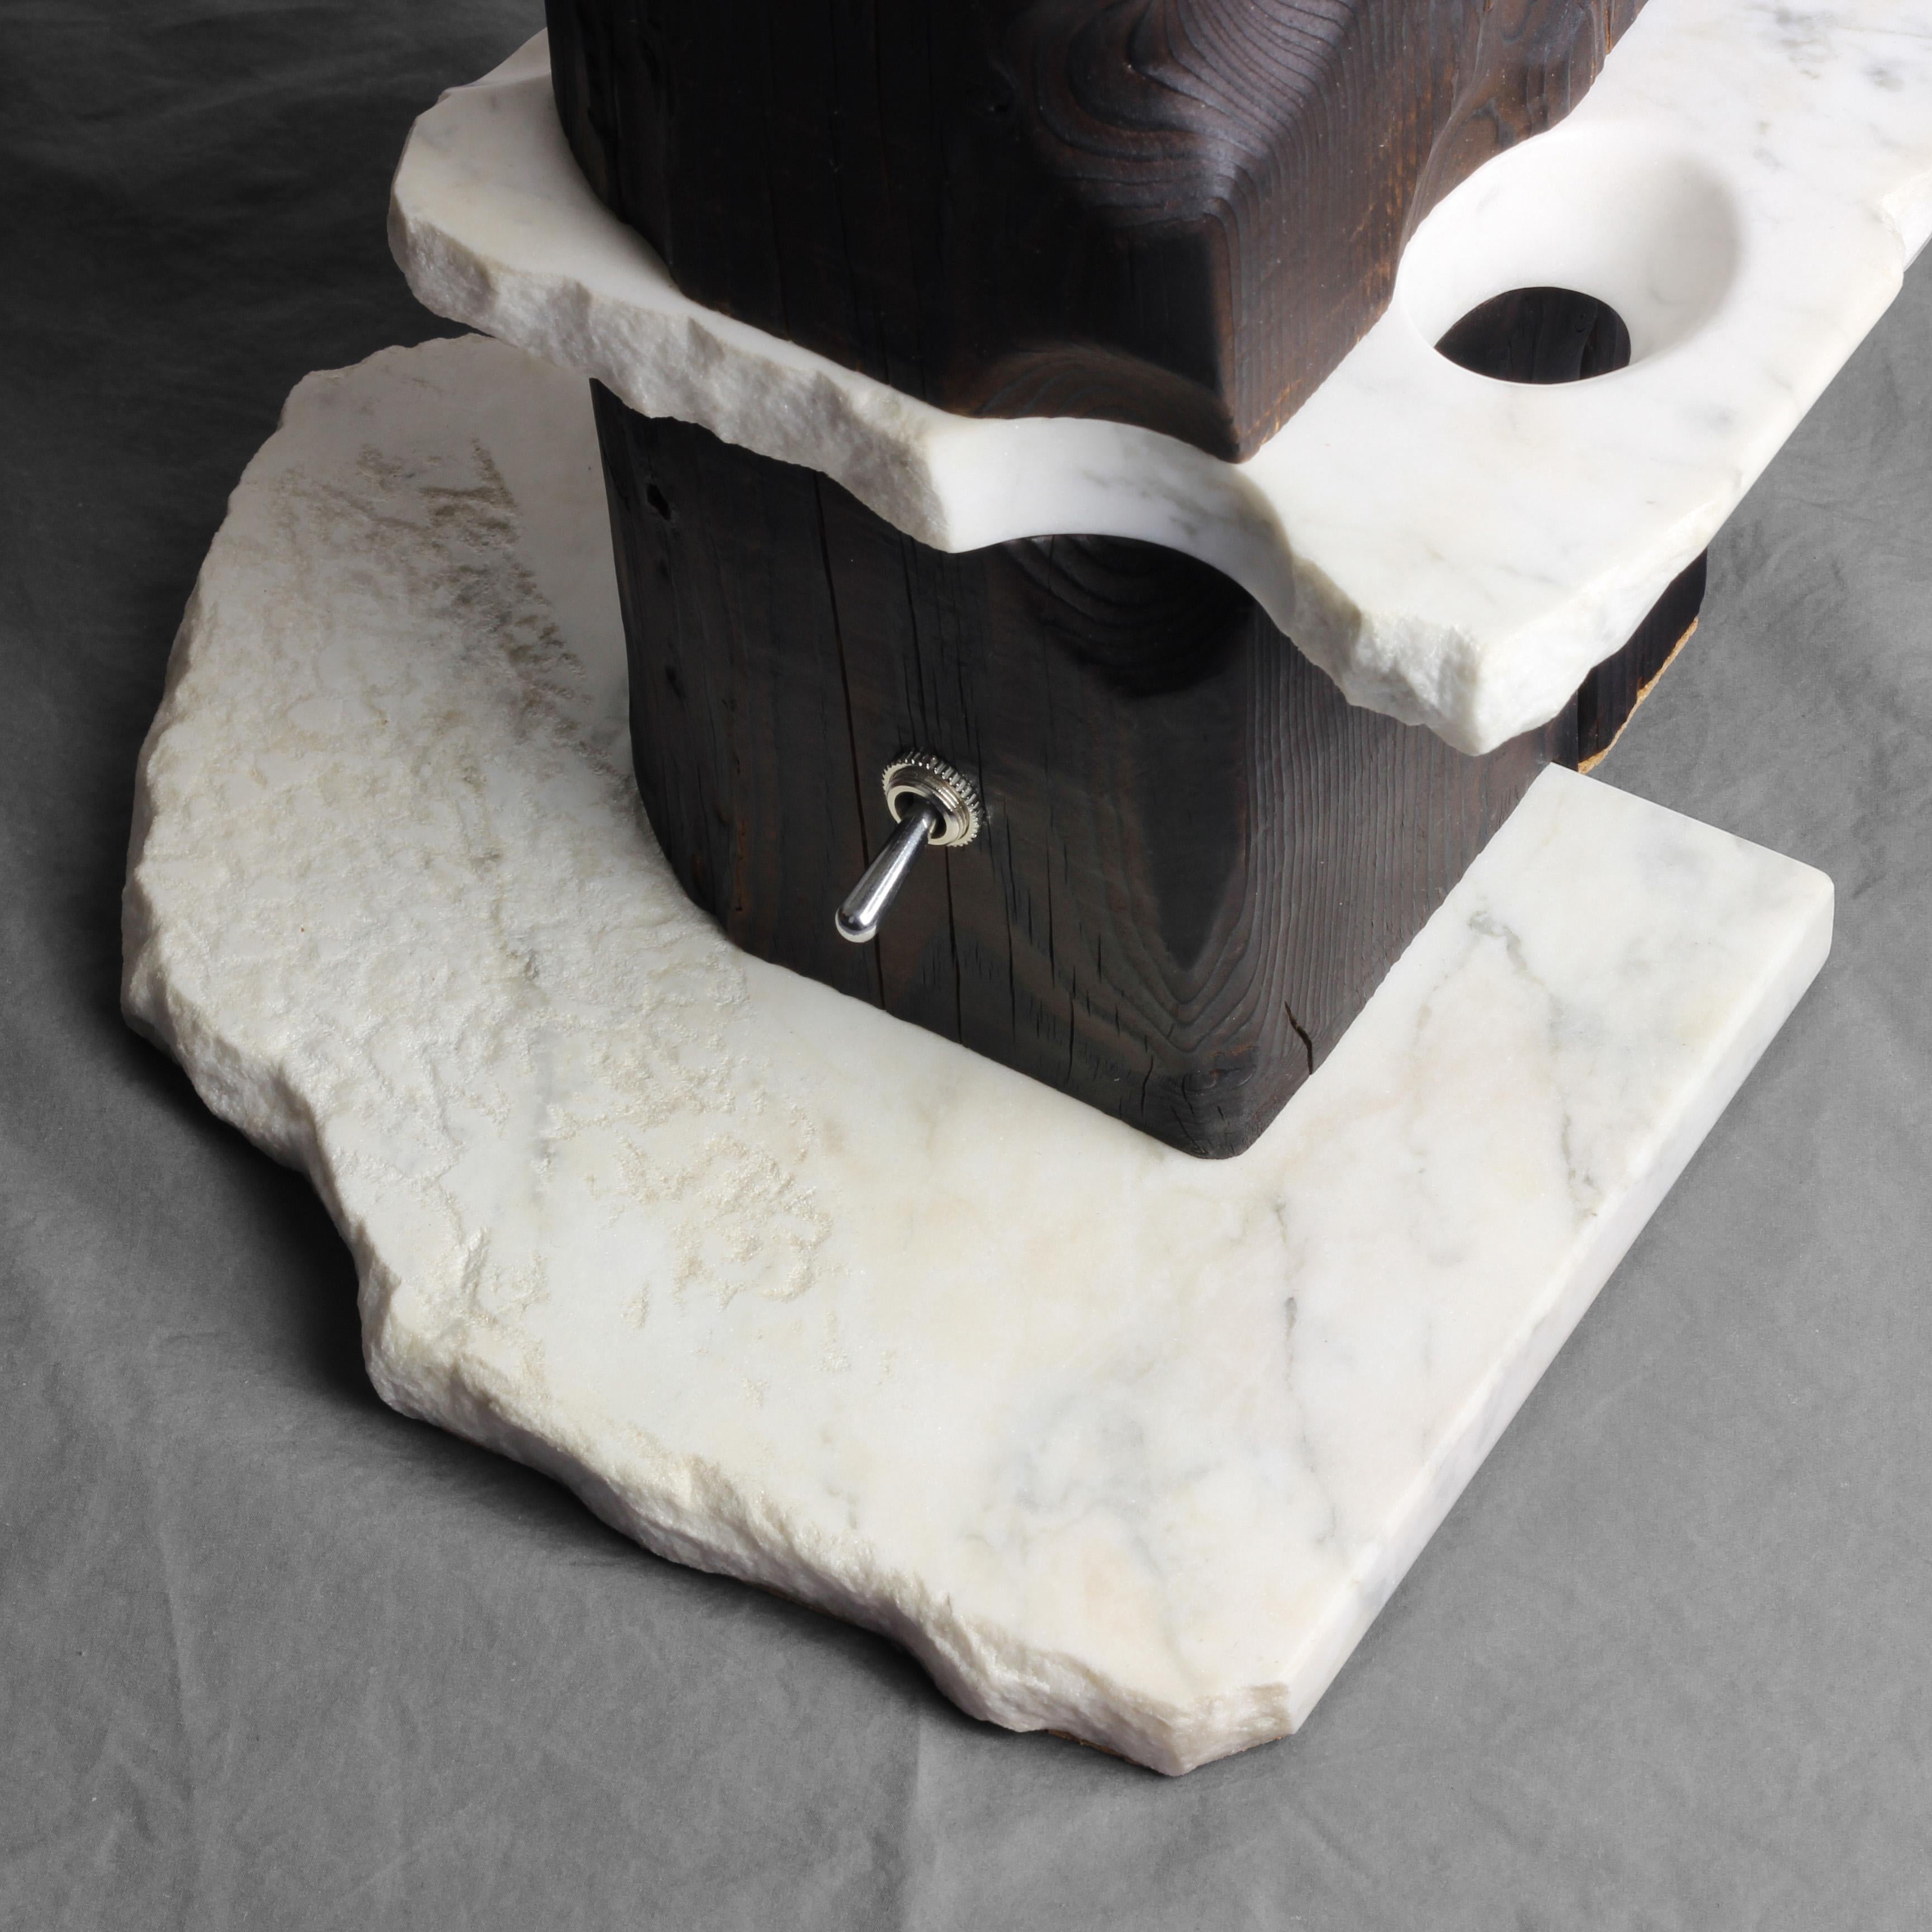 Volcano - Sculptured Lighting, Table Lamp from Reclaimed Burned Wood and Marble For Sale 2